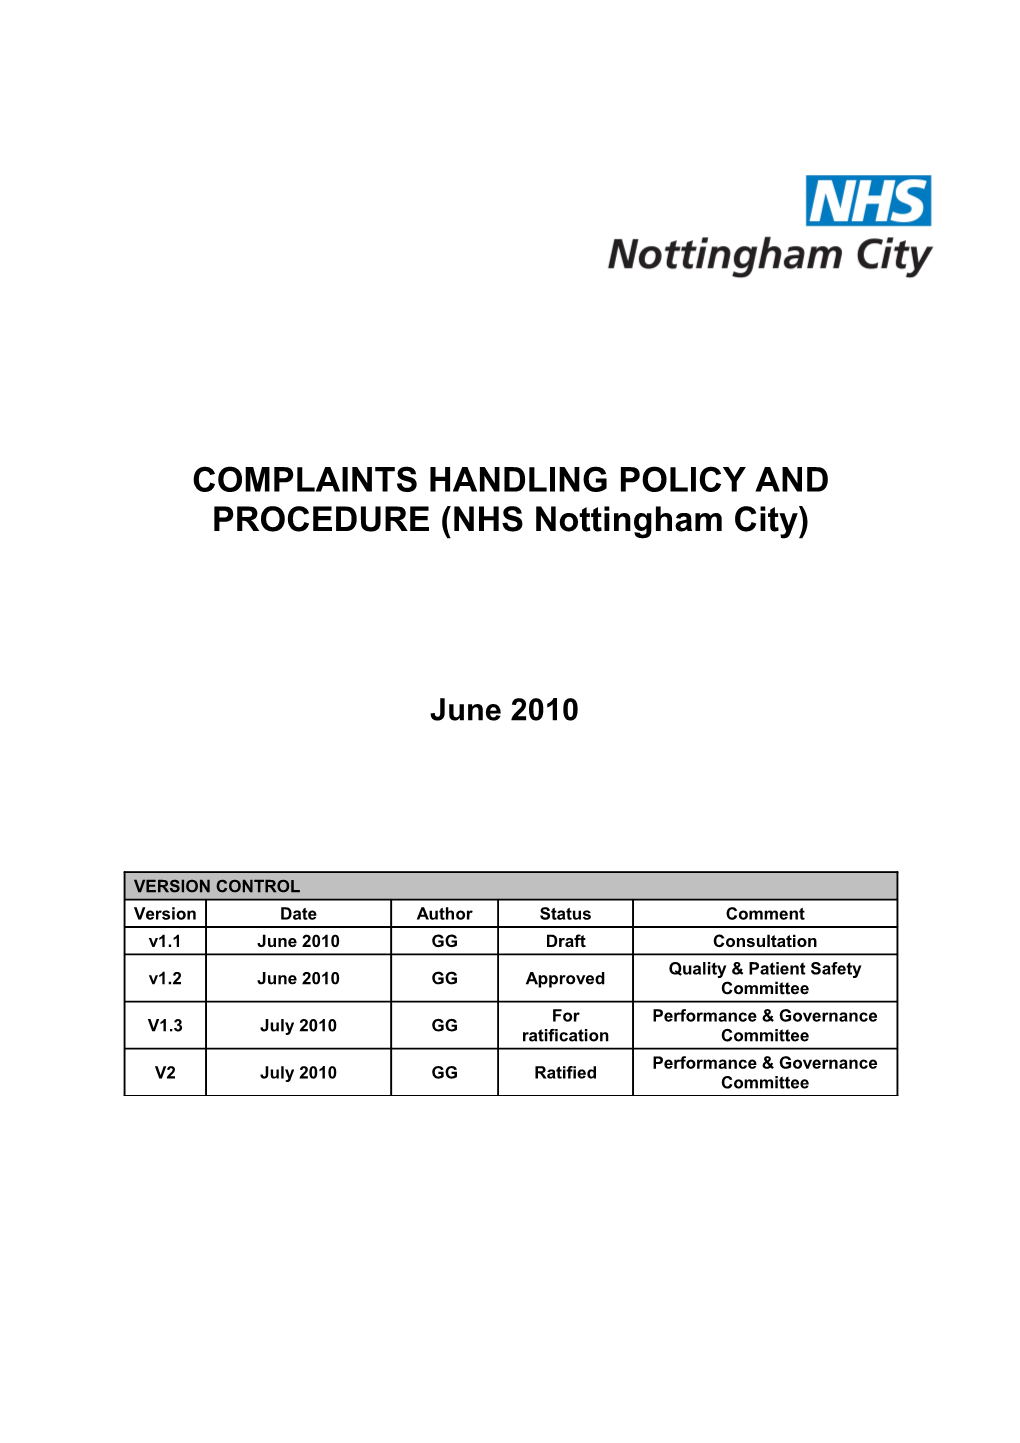 Complaints Handling Policy and Procedure